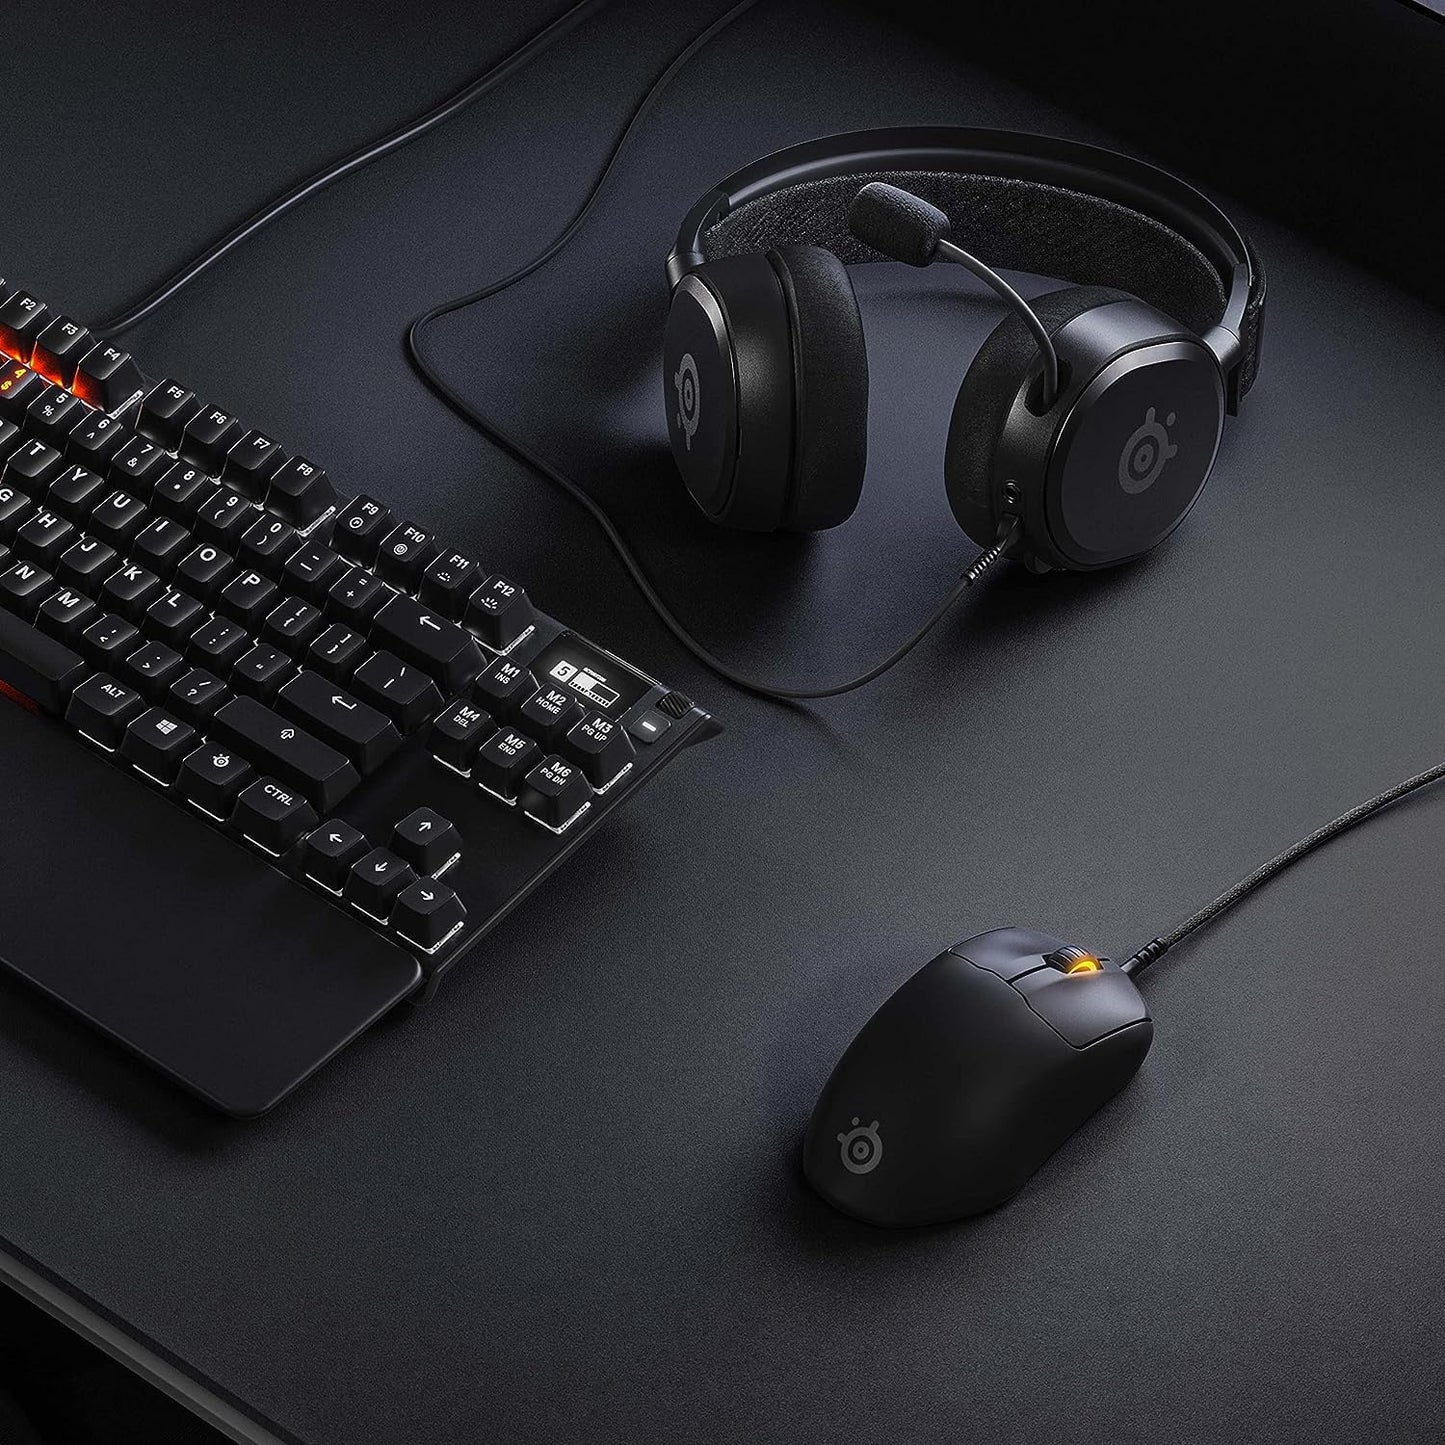 SteelSeries Prime wired precision esports gaming mouse